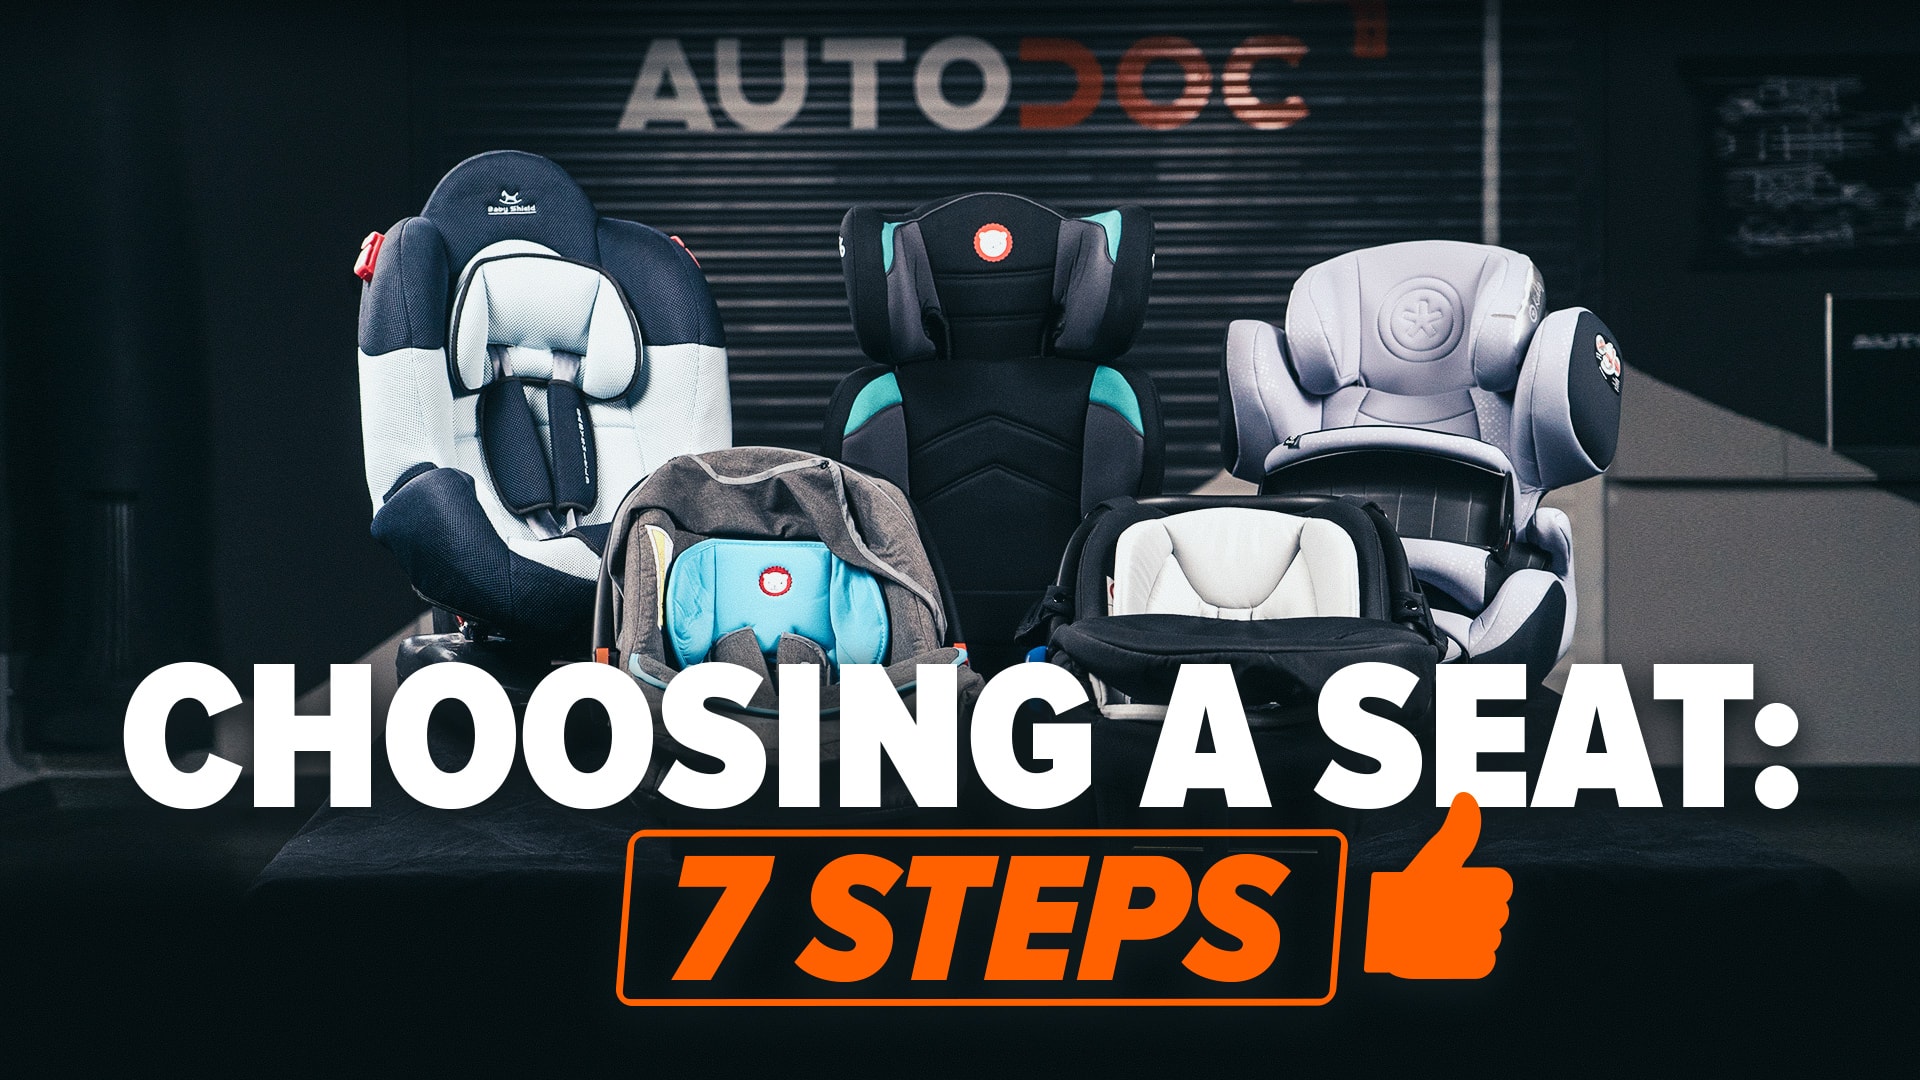 How to choose the right car seat for your child